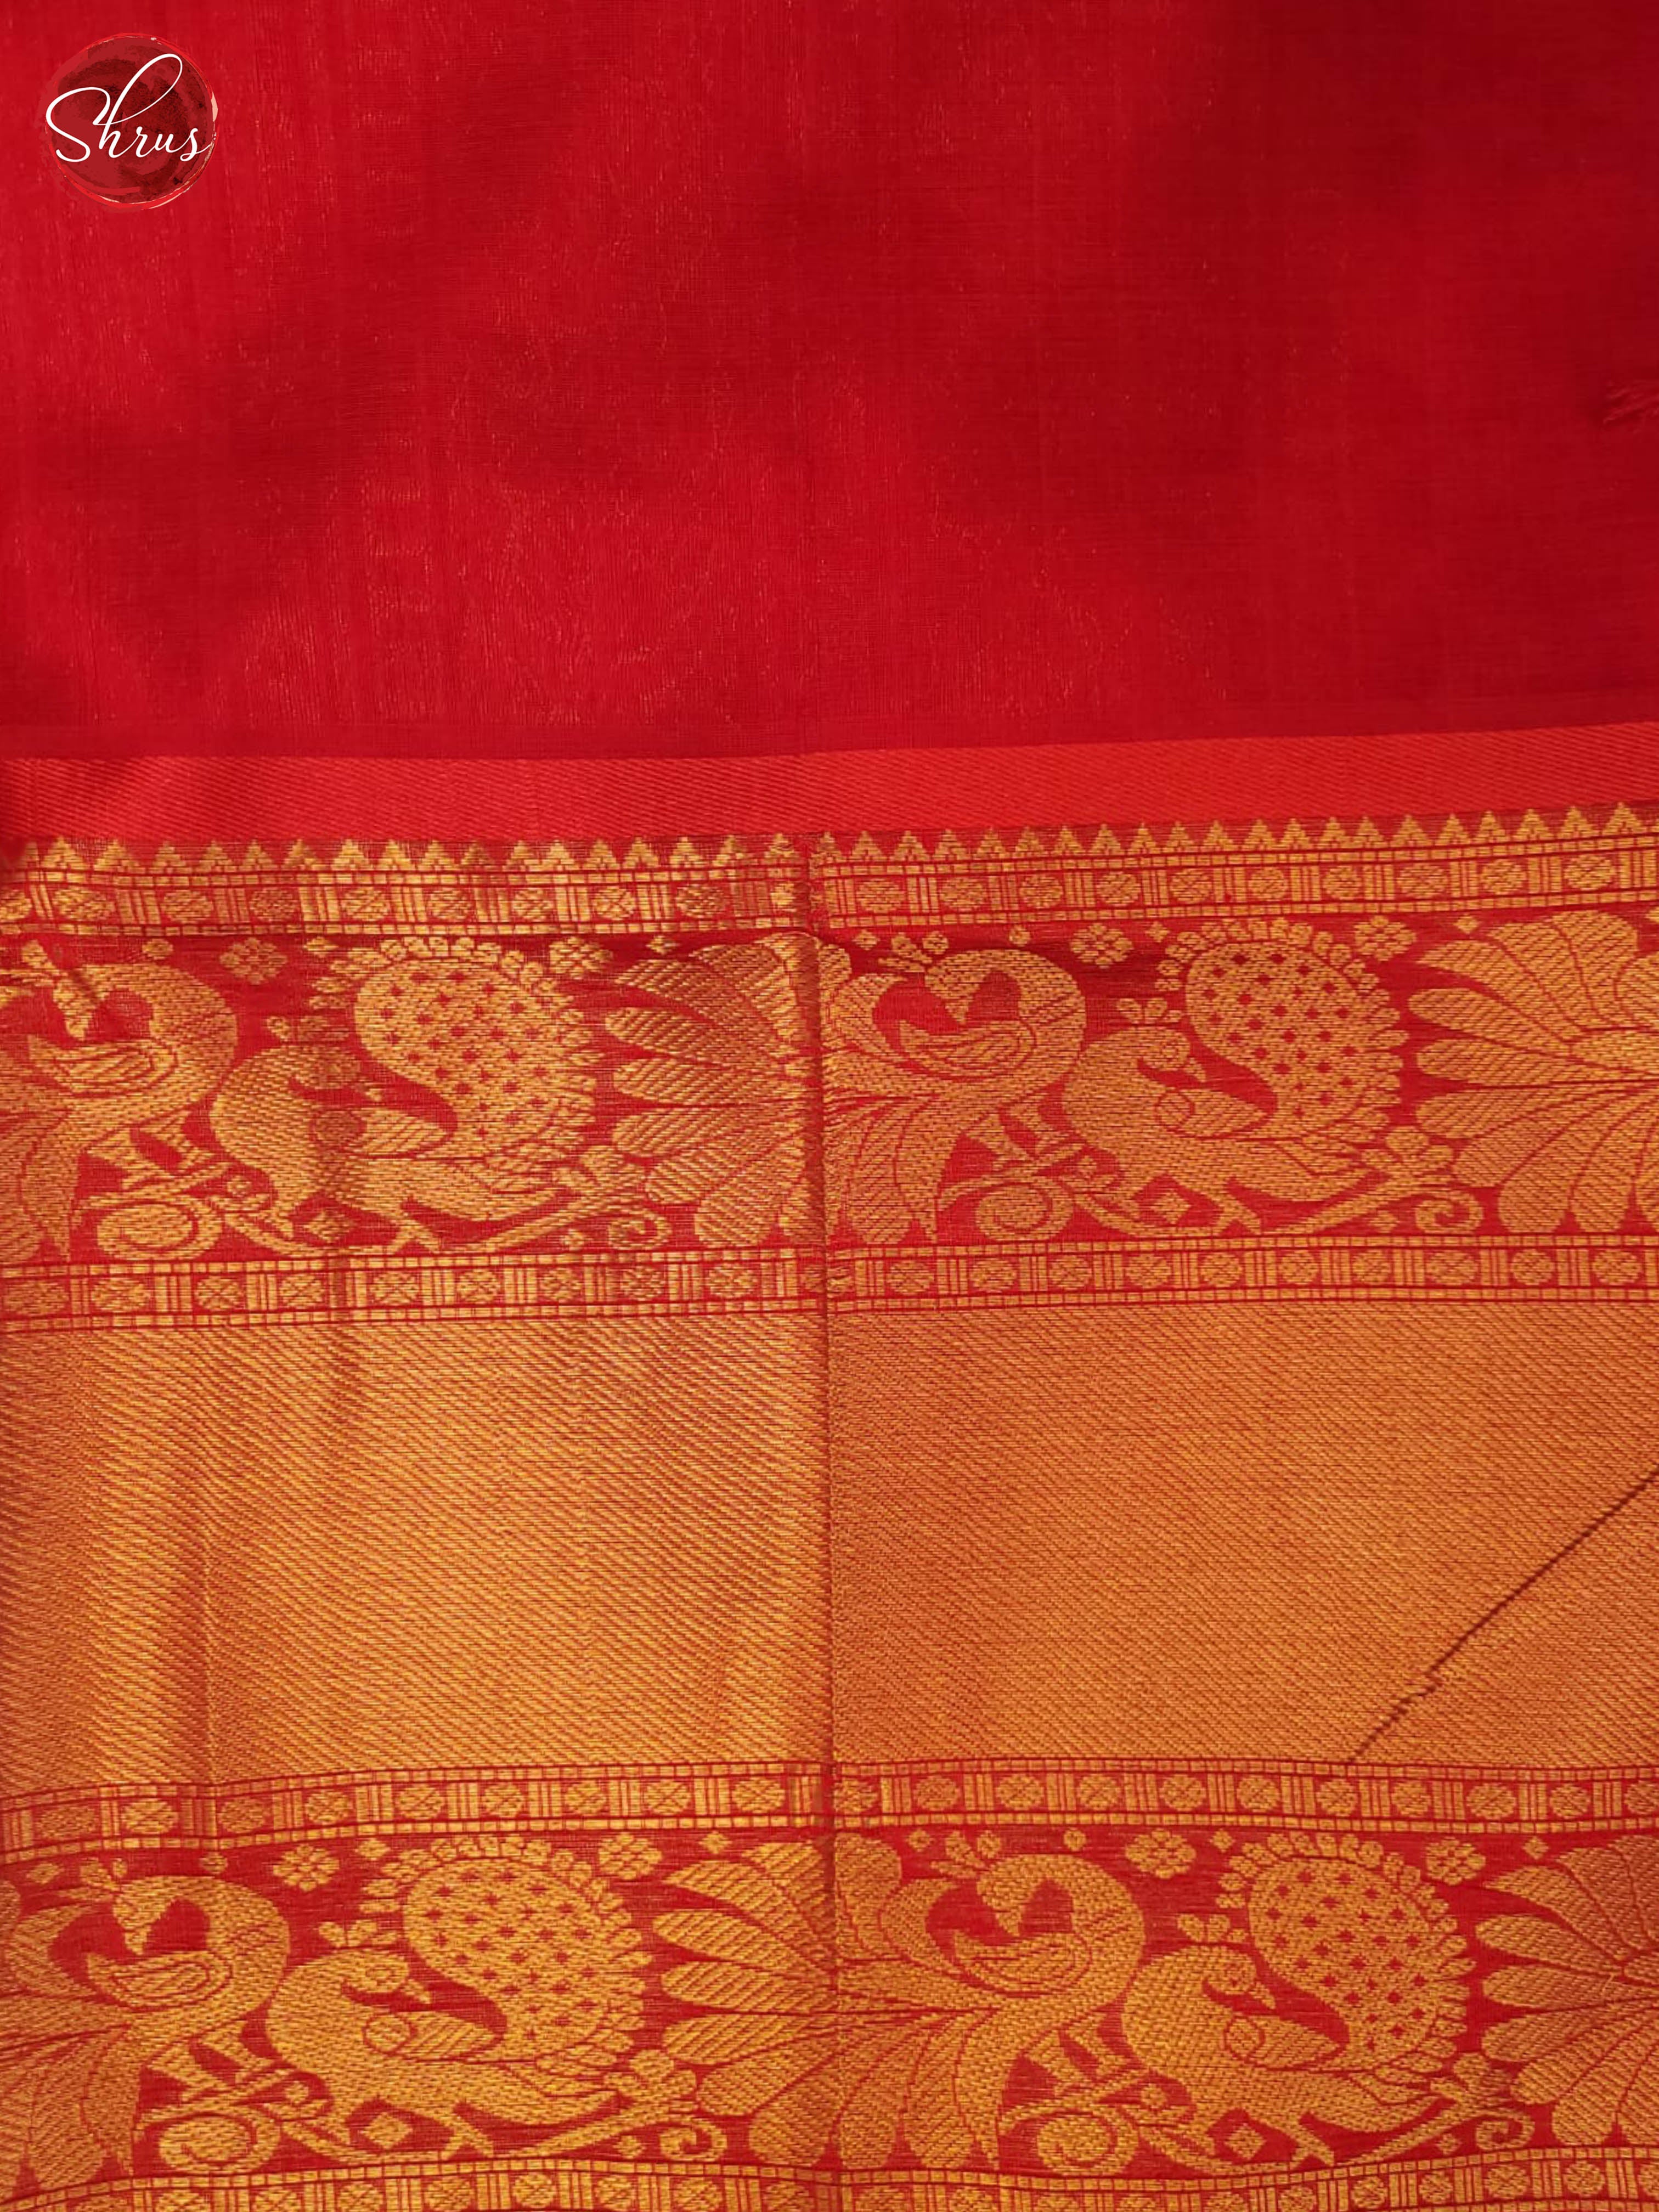 Green and Red-Silk cotton Saree - Shop on ShrusEternity.com